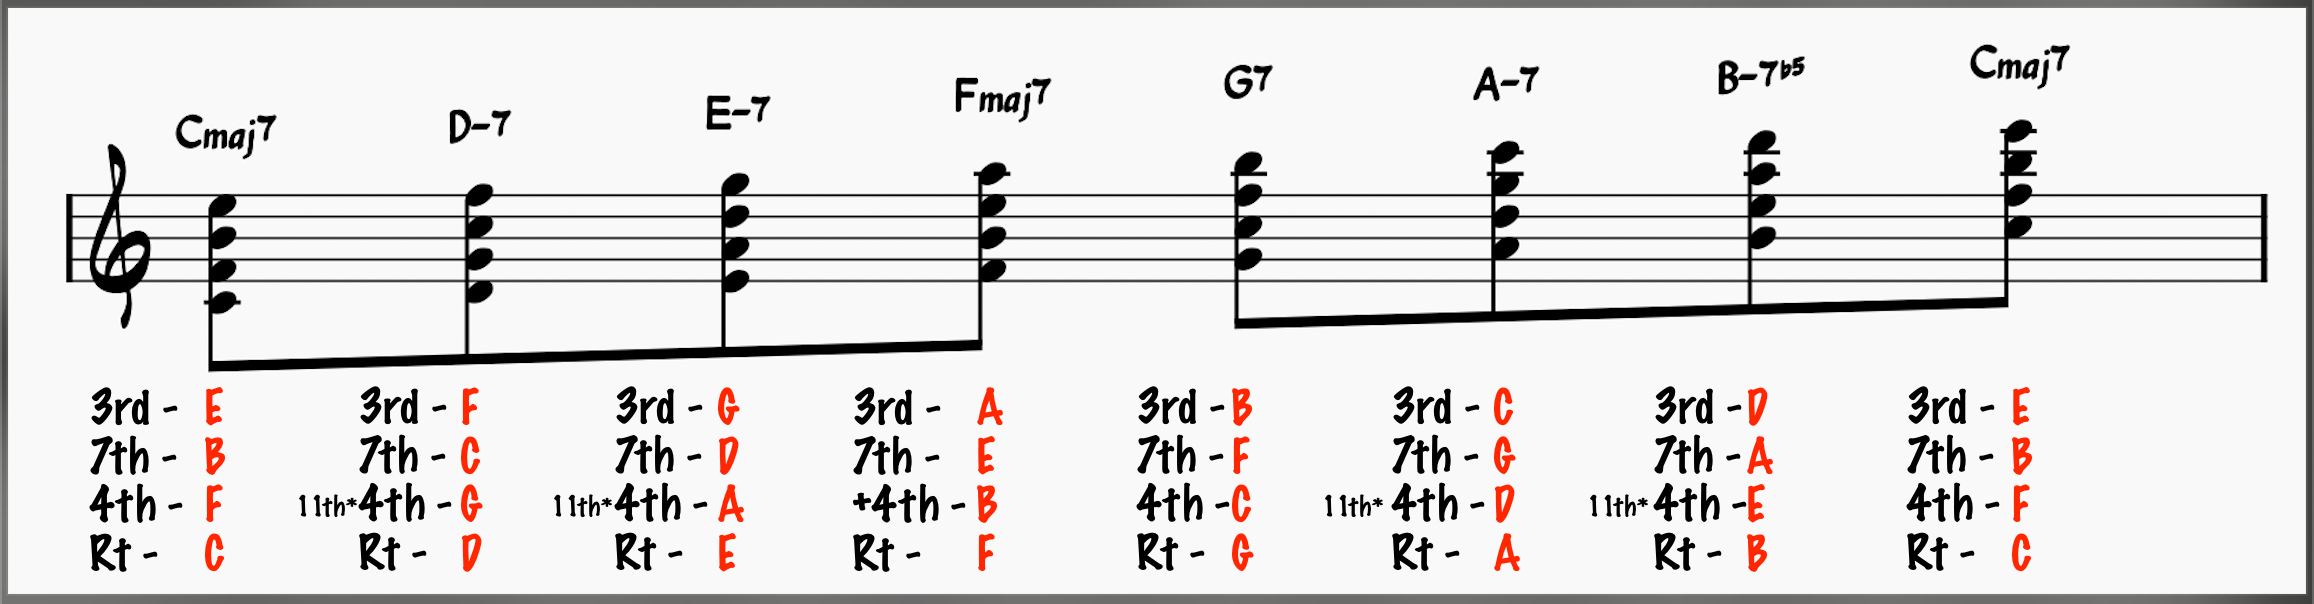 C major scale harmonized in 4ths to create quartal voicings for 7th chords